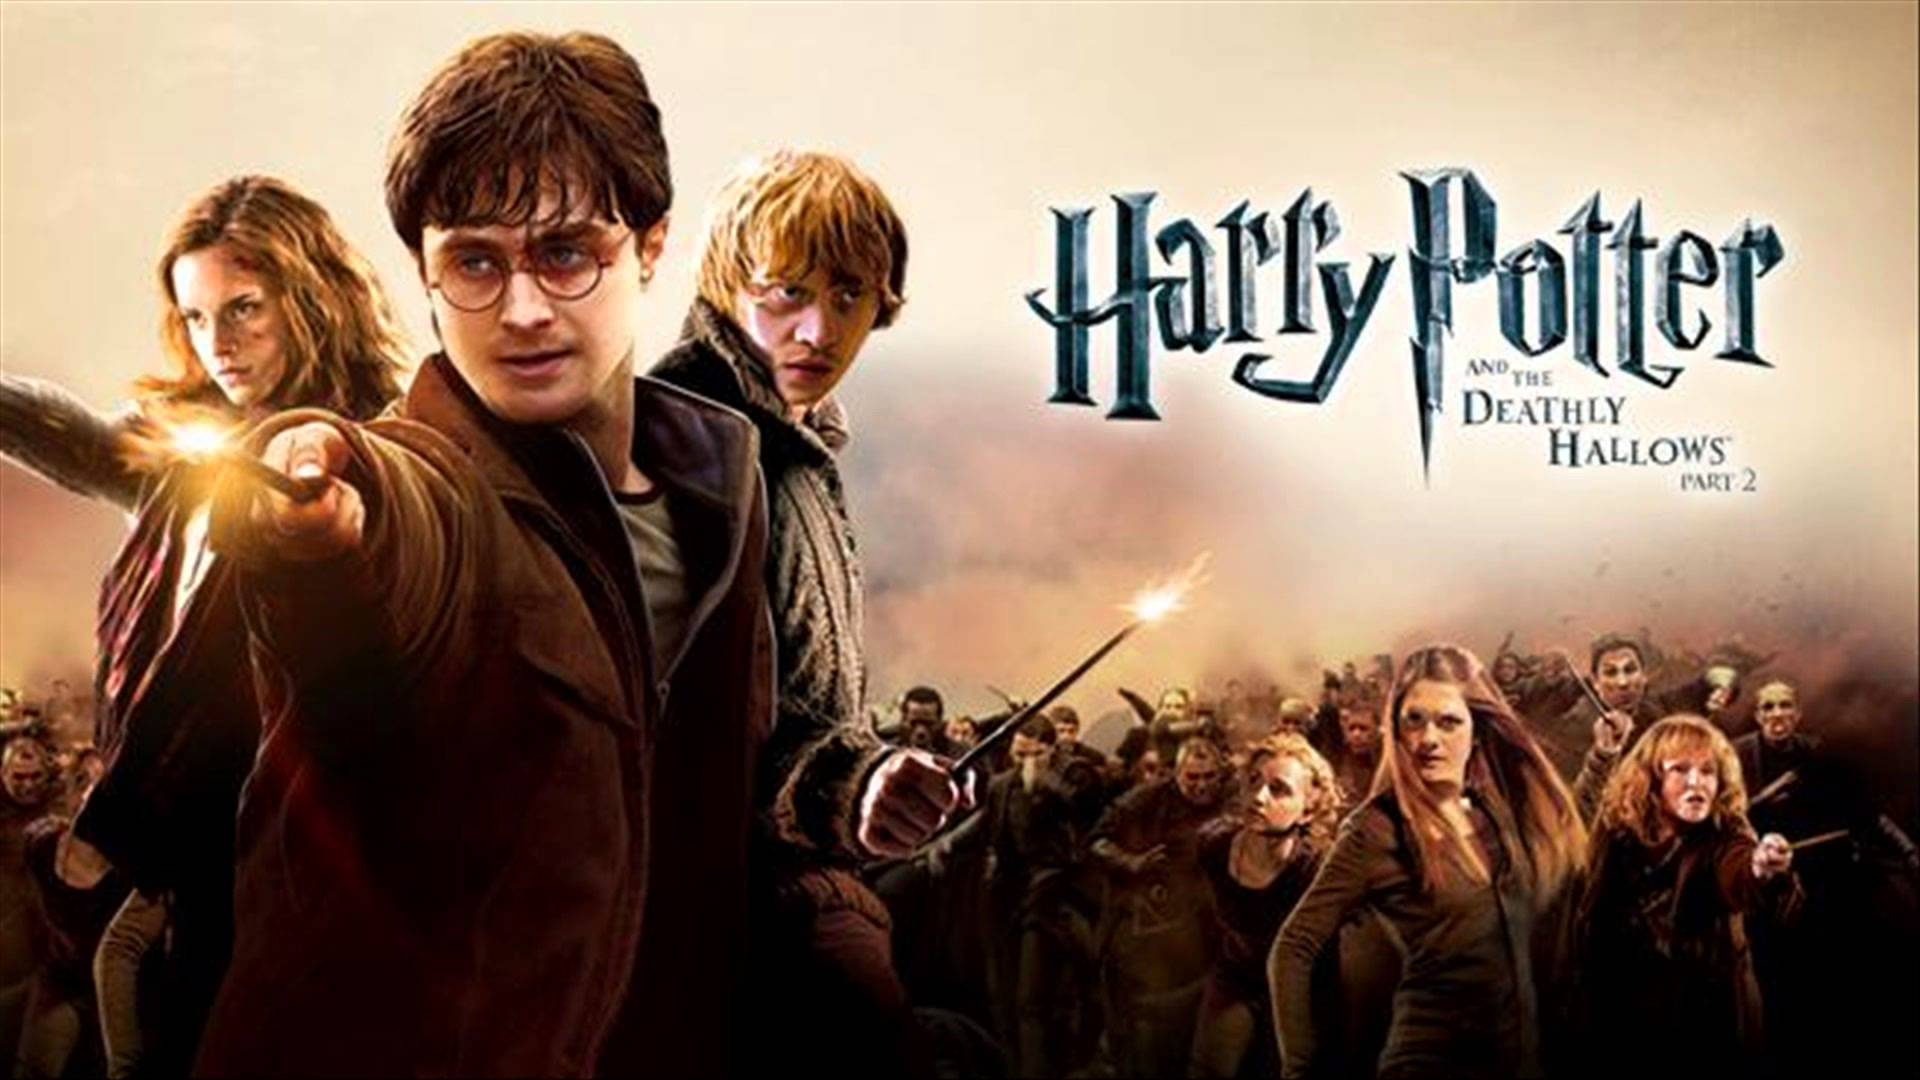 Harry Potter And The Deathly Hallows: Part 2 #5